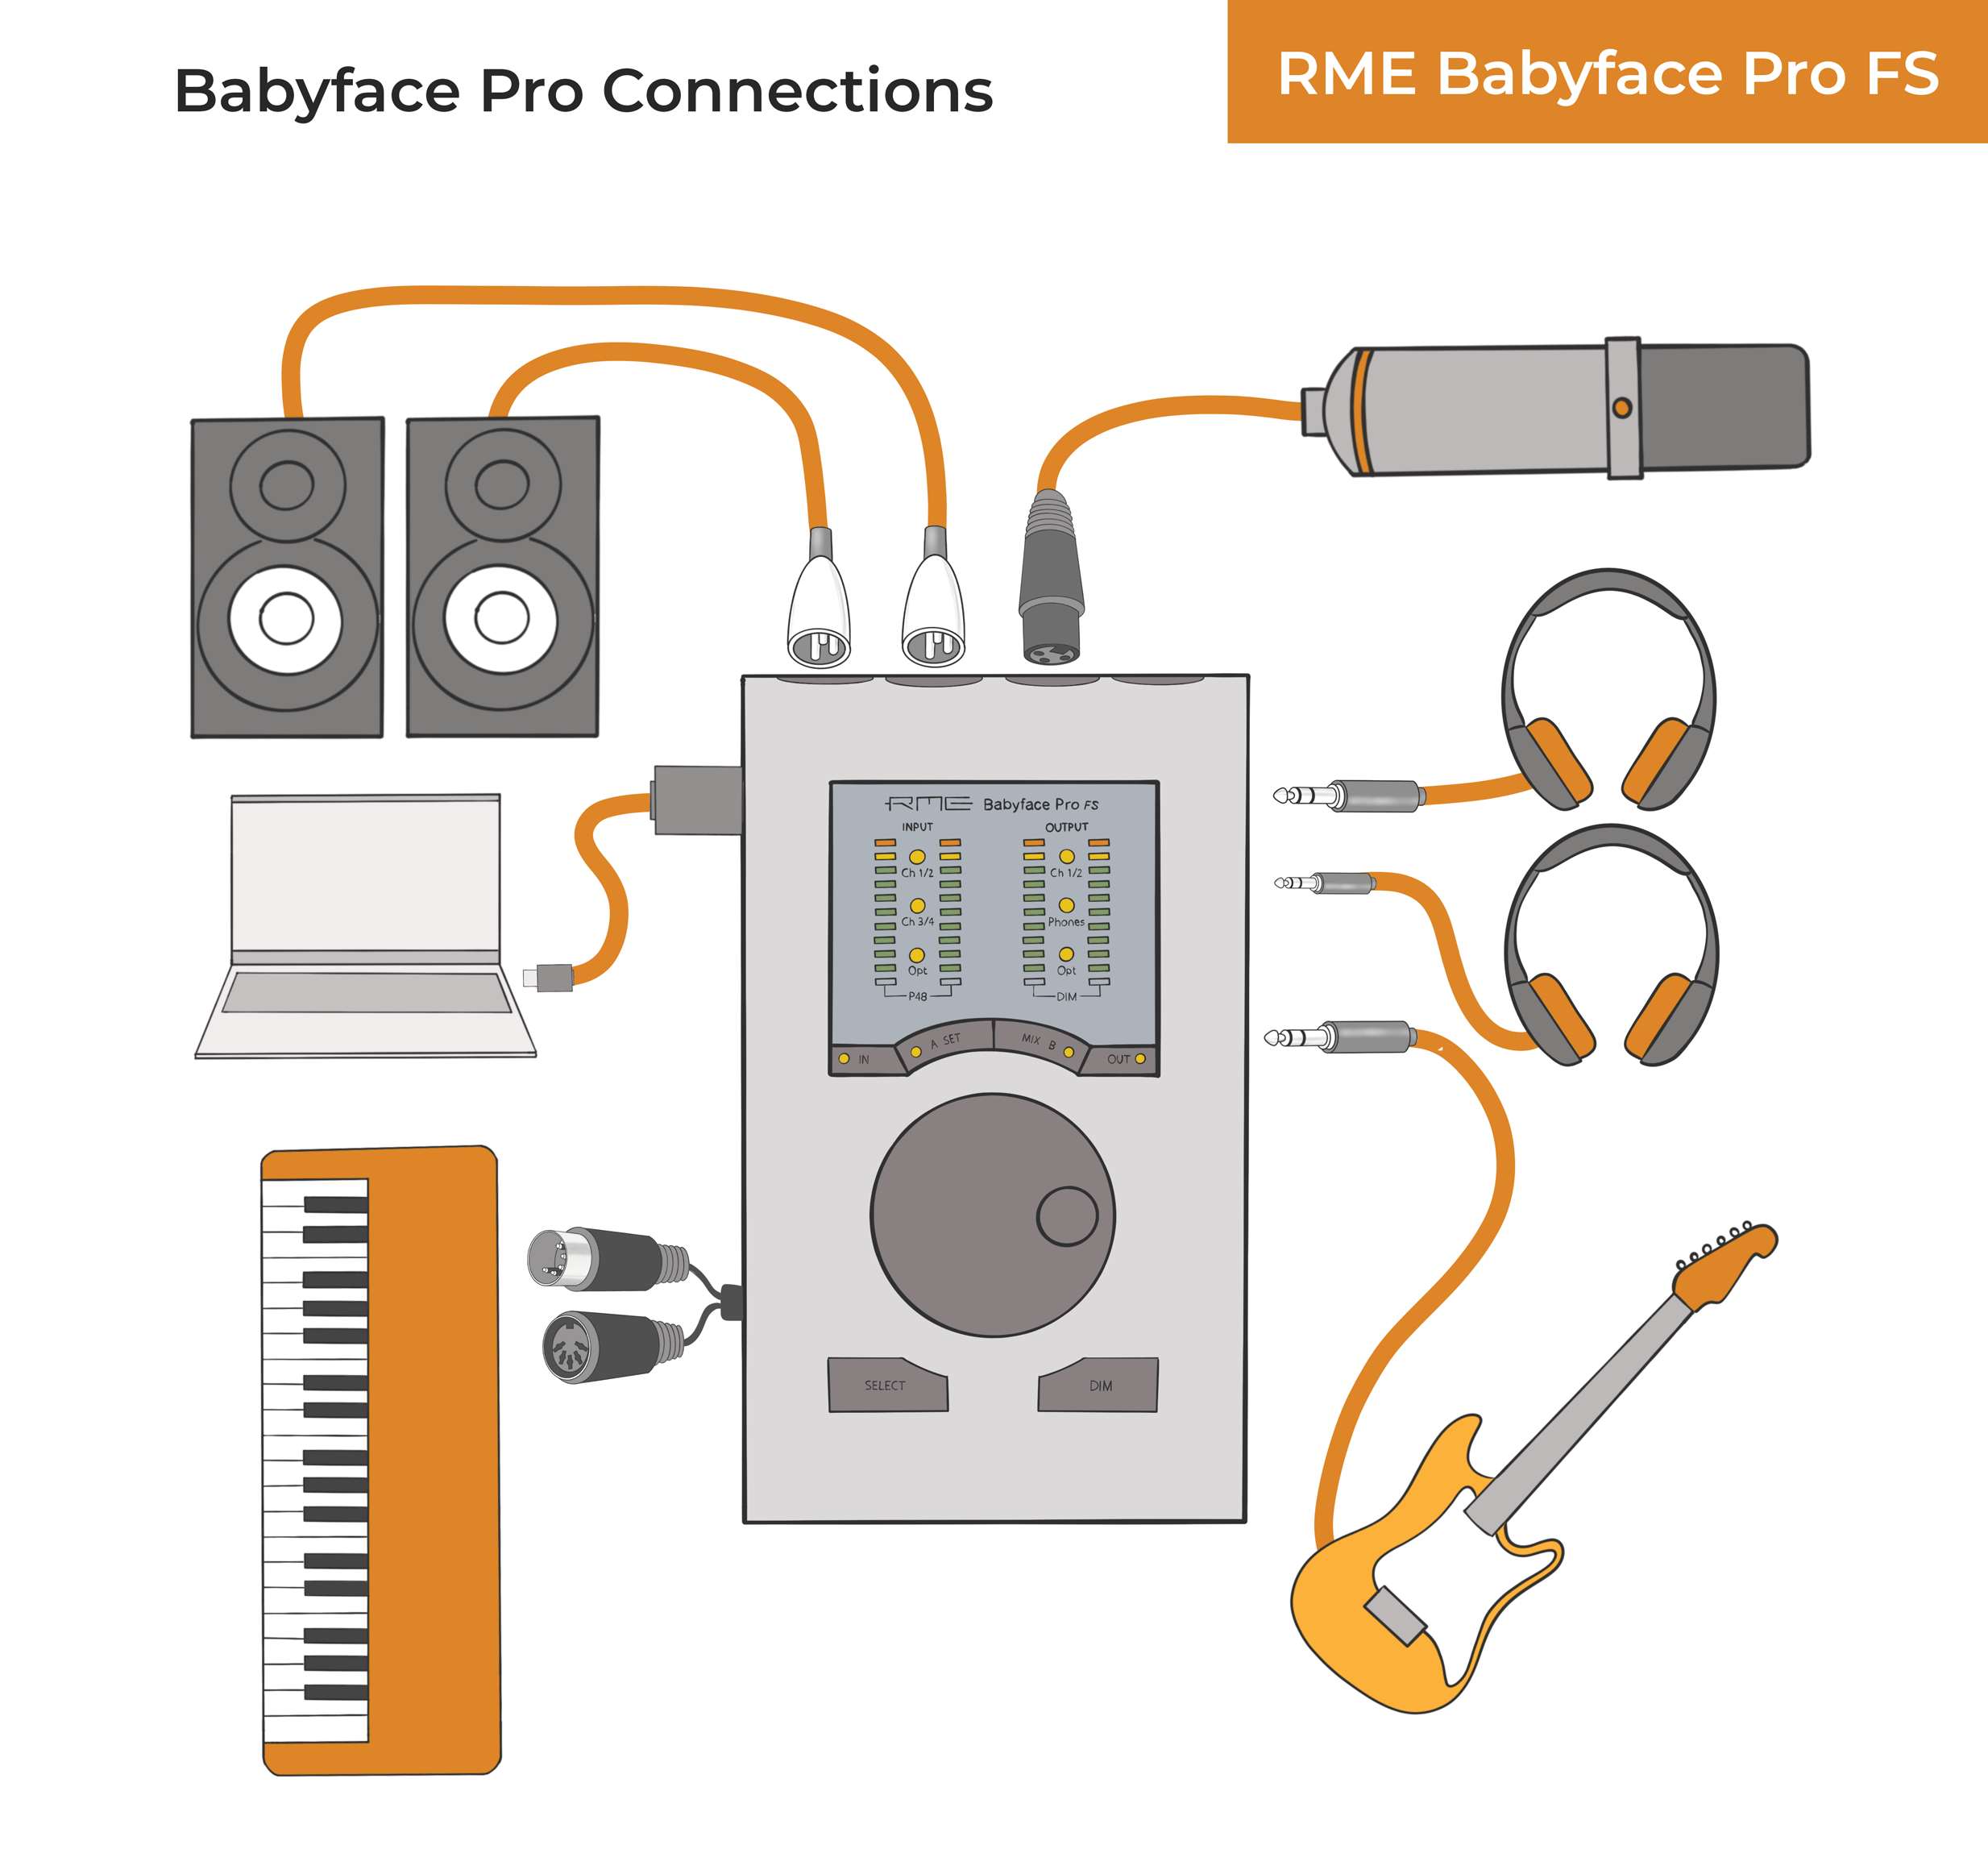 Connecting an RME Babyface Pro  FS